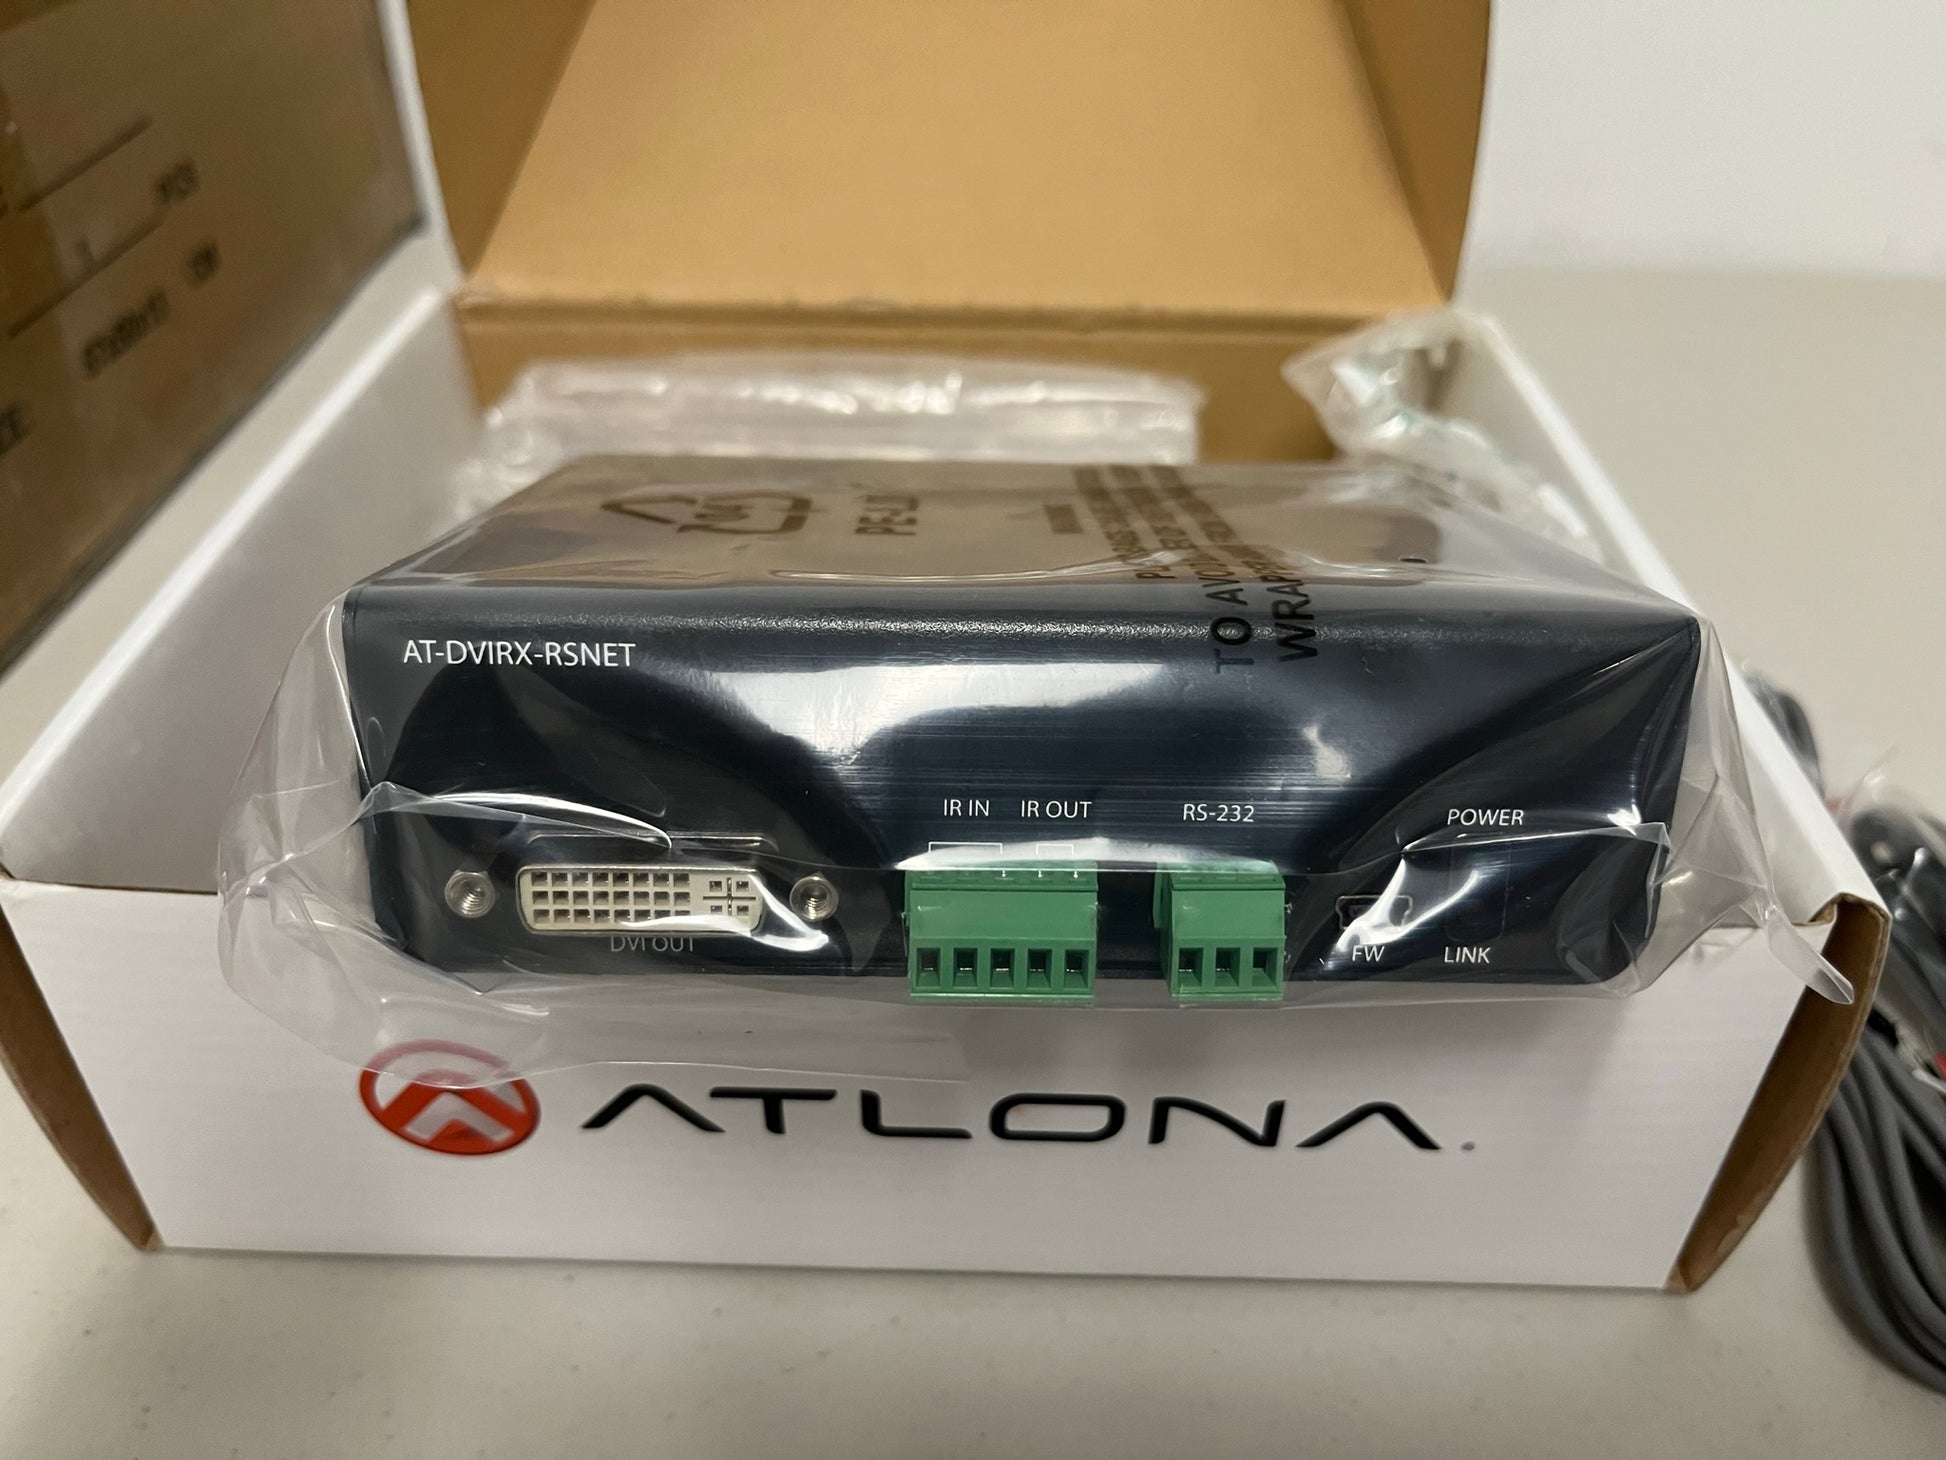 New Atlona AT-DVIRX-RSNET , DVI Receiver for Sale,  We Sell Professional Audio Equipment. Audio Systems, Amplifiers, Consoles, Mixers, Electronics, Entertainment, Sound, Live.